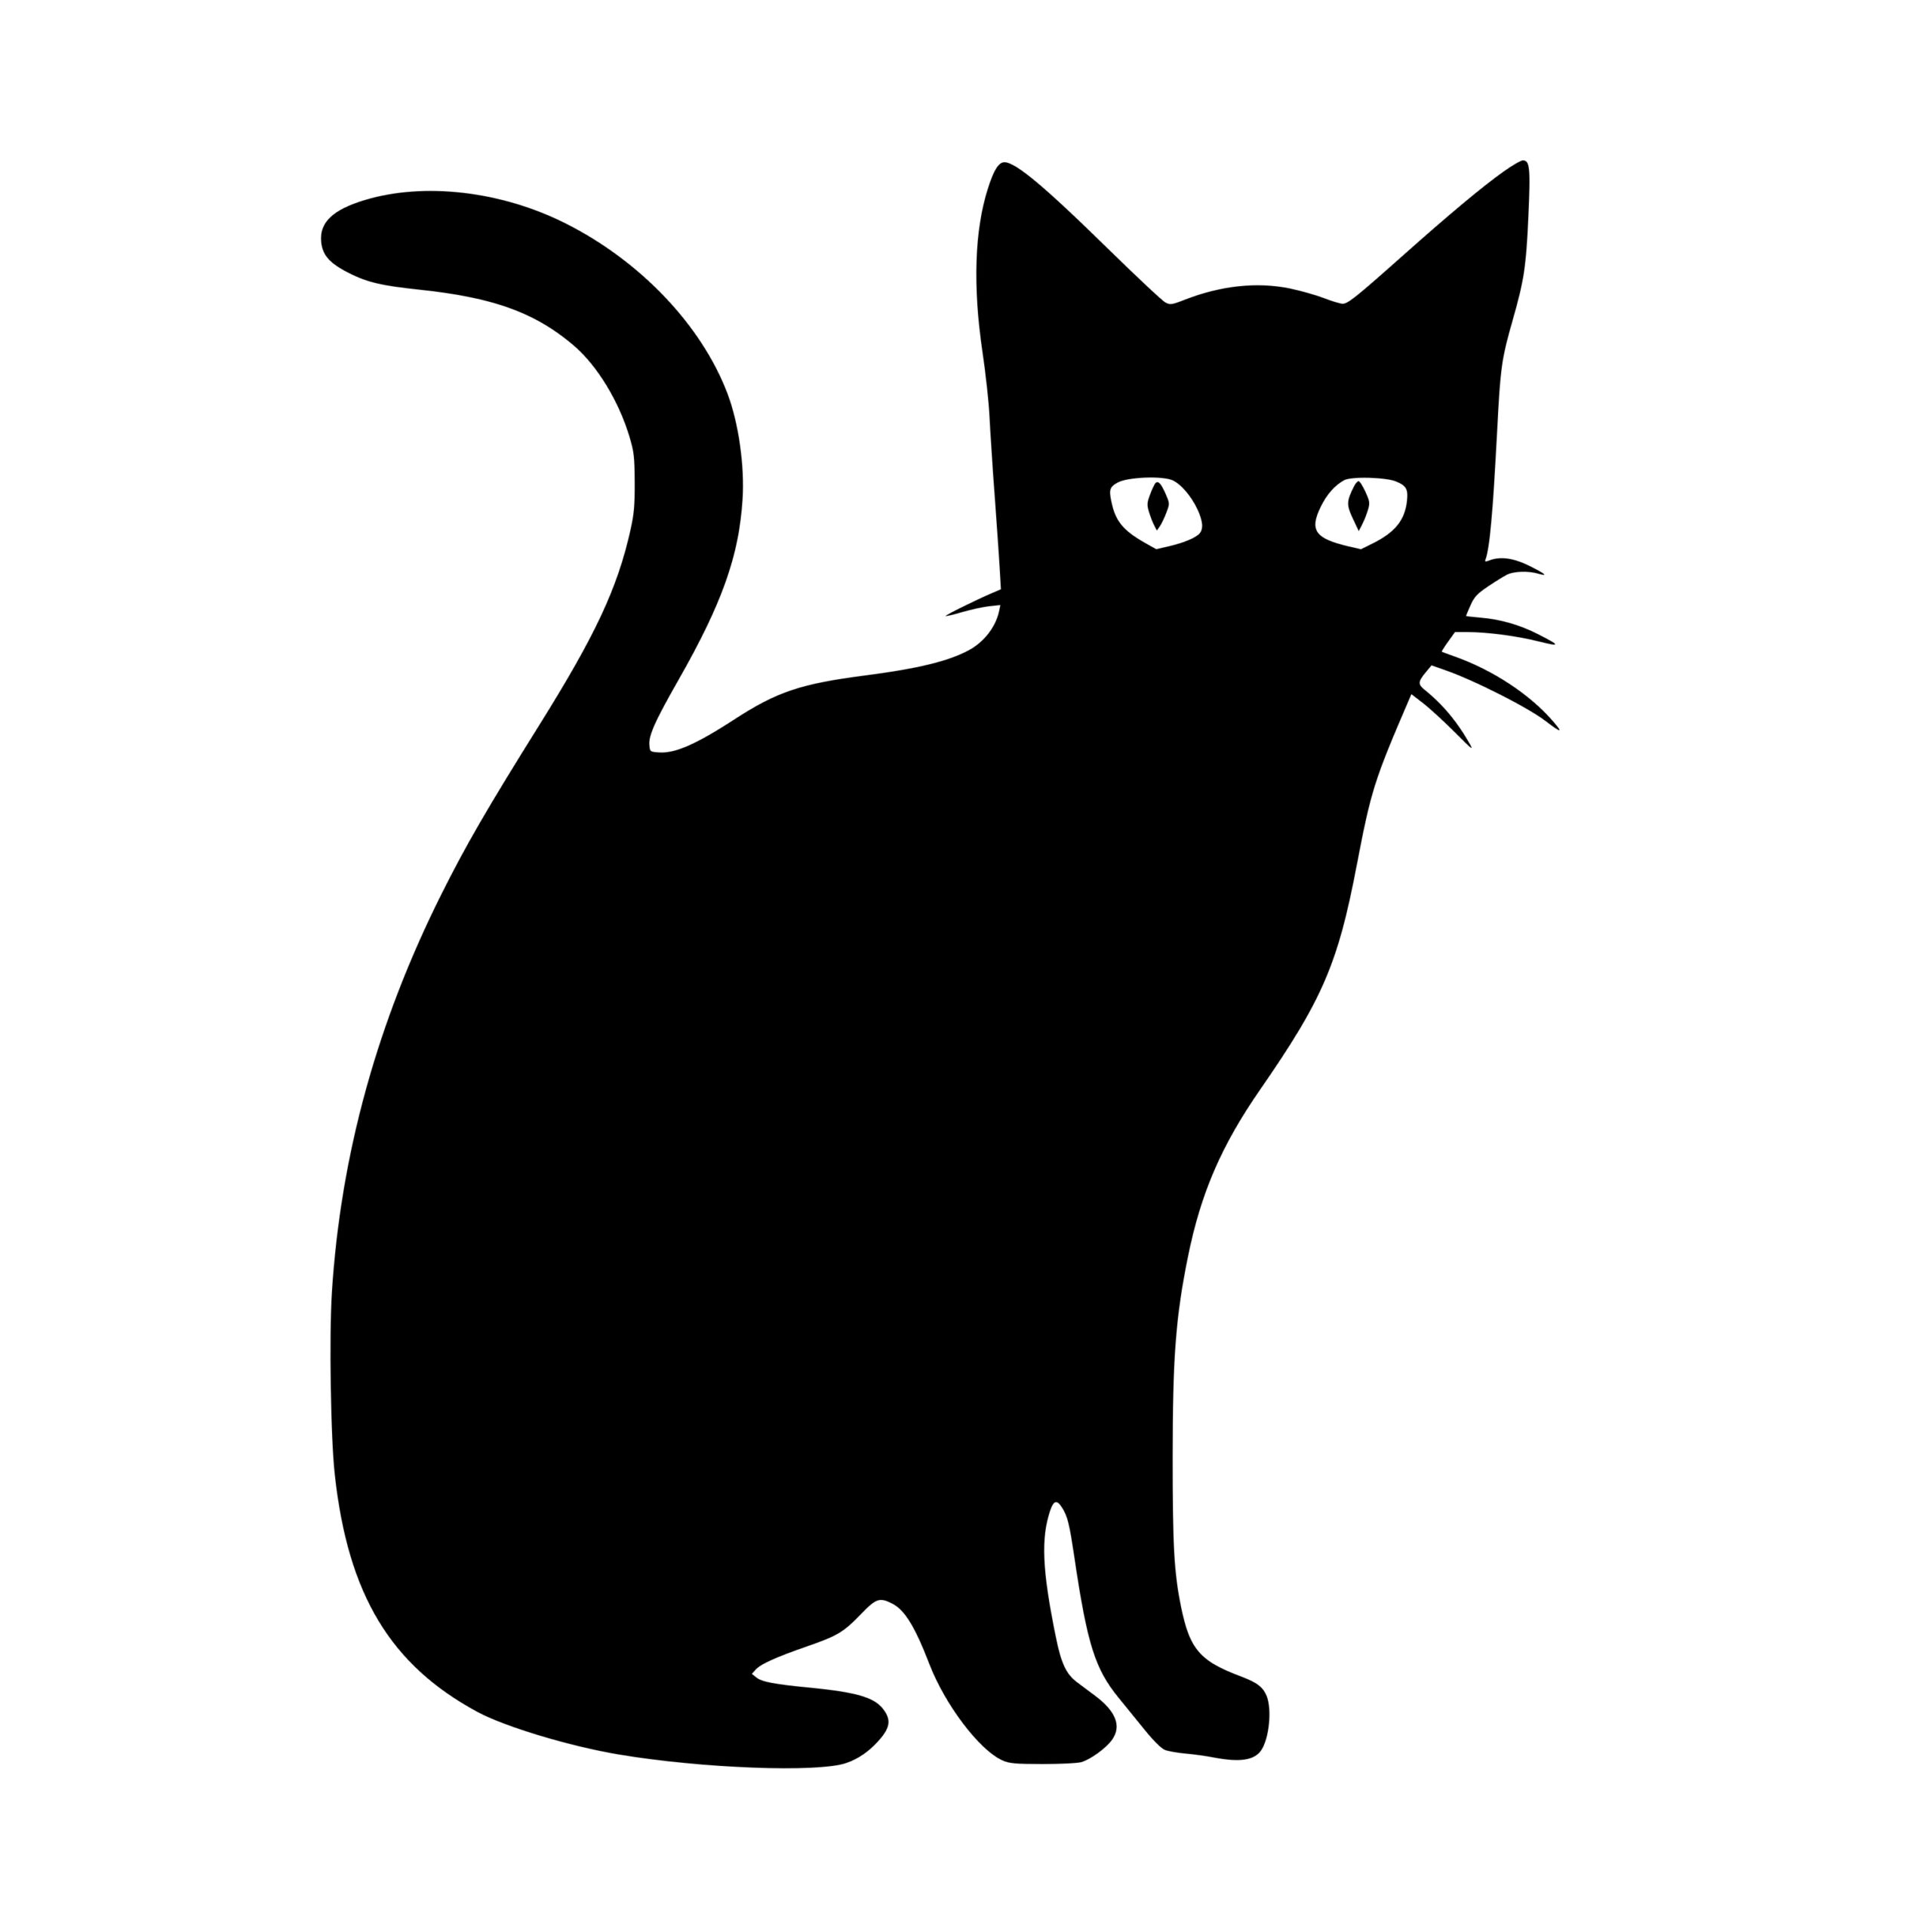 Kitty Pal - SVG, PNG, DXF Instant Download for Cricut, Silhouette ...